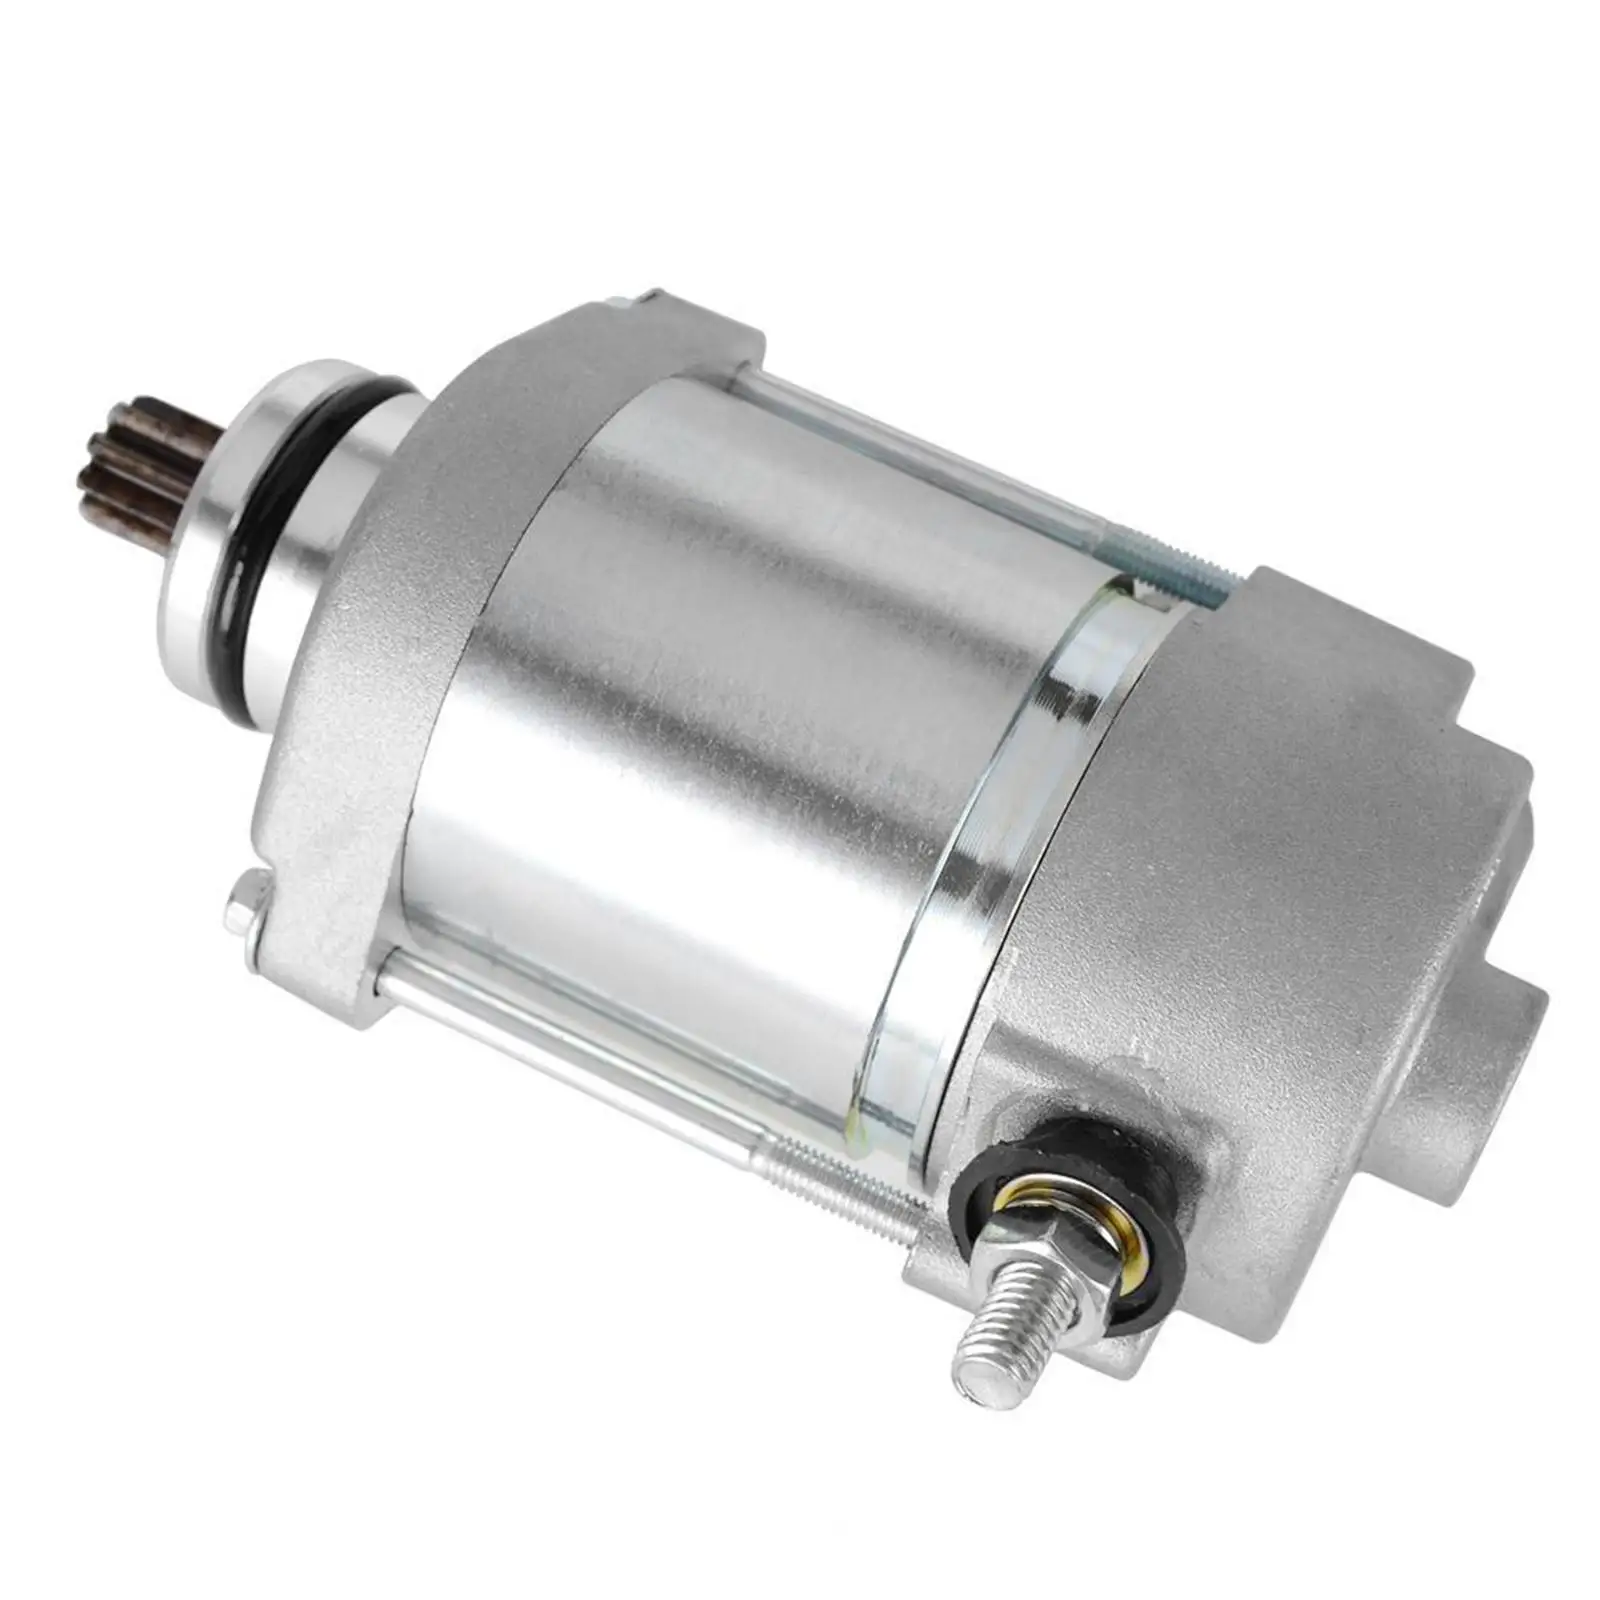 Motorcycle Starter Motor Directly Replace Smu0505 for 200 250